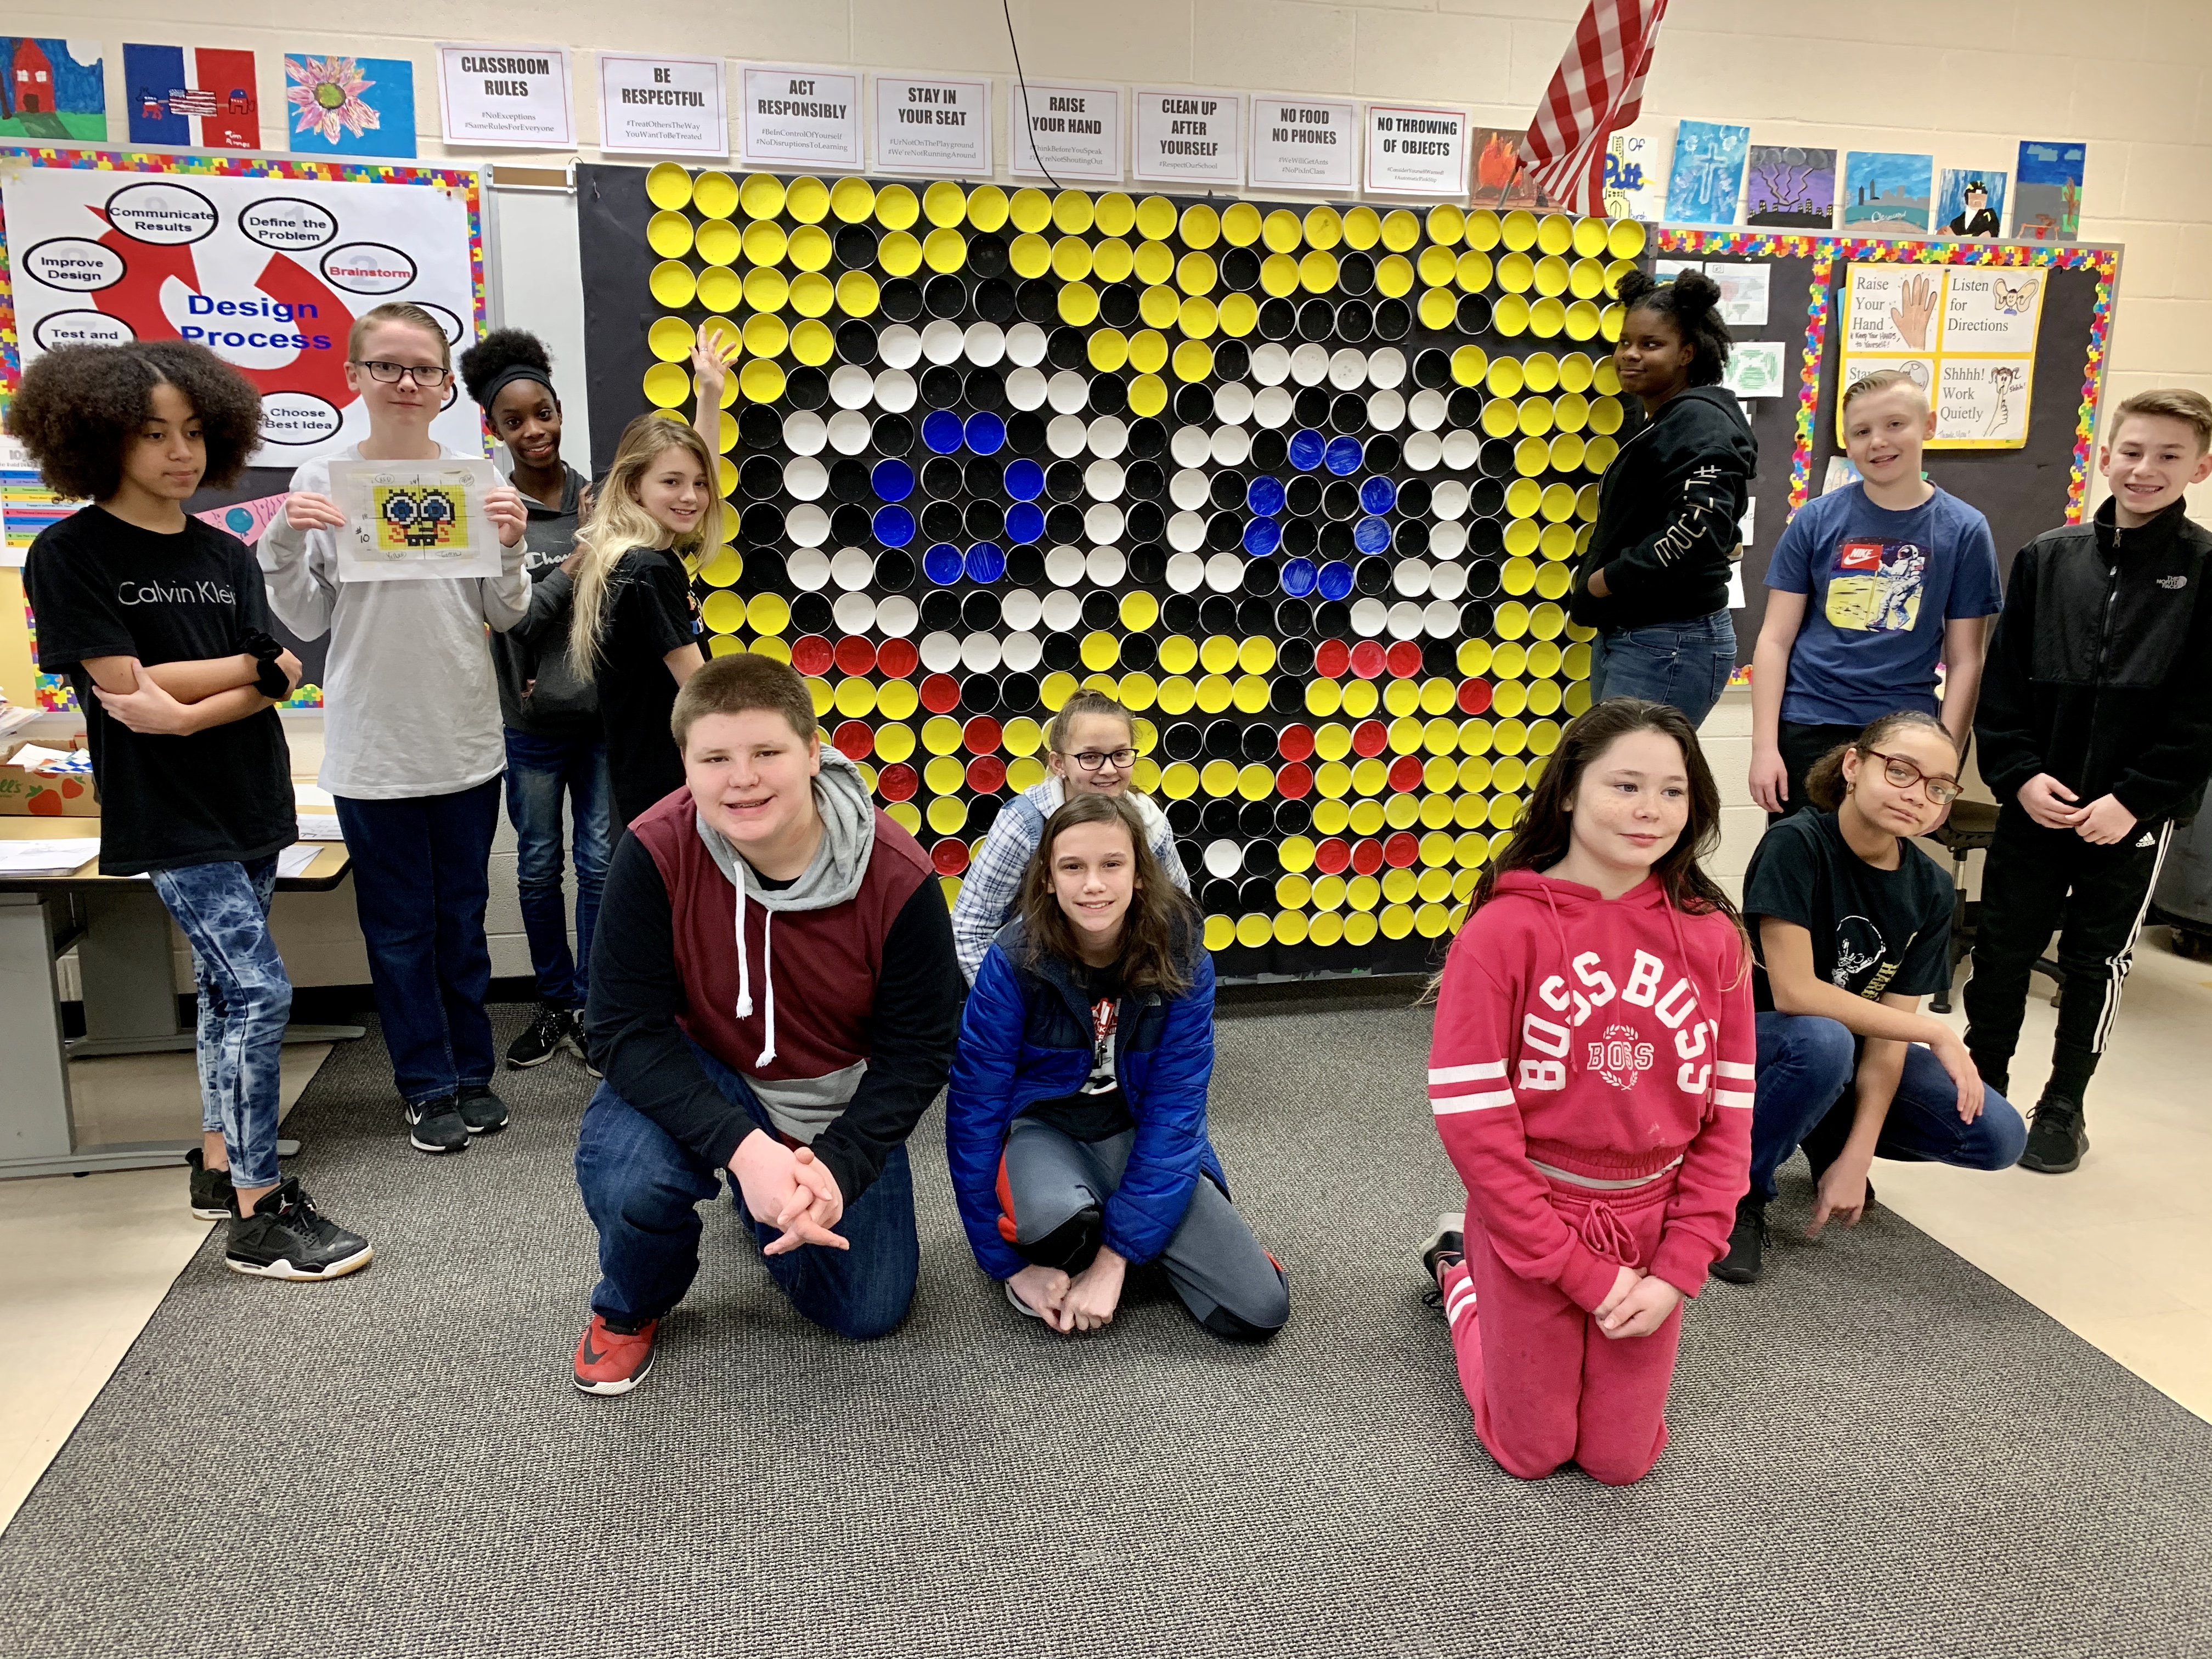 students in front of a sponge bob art picture